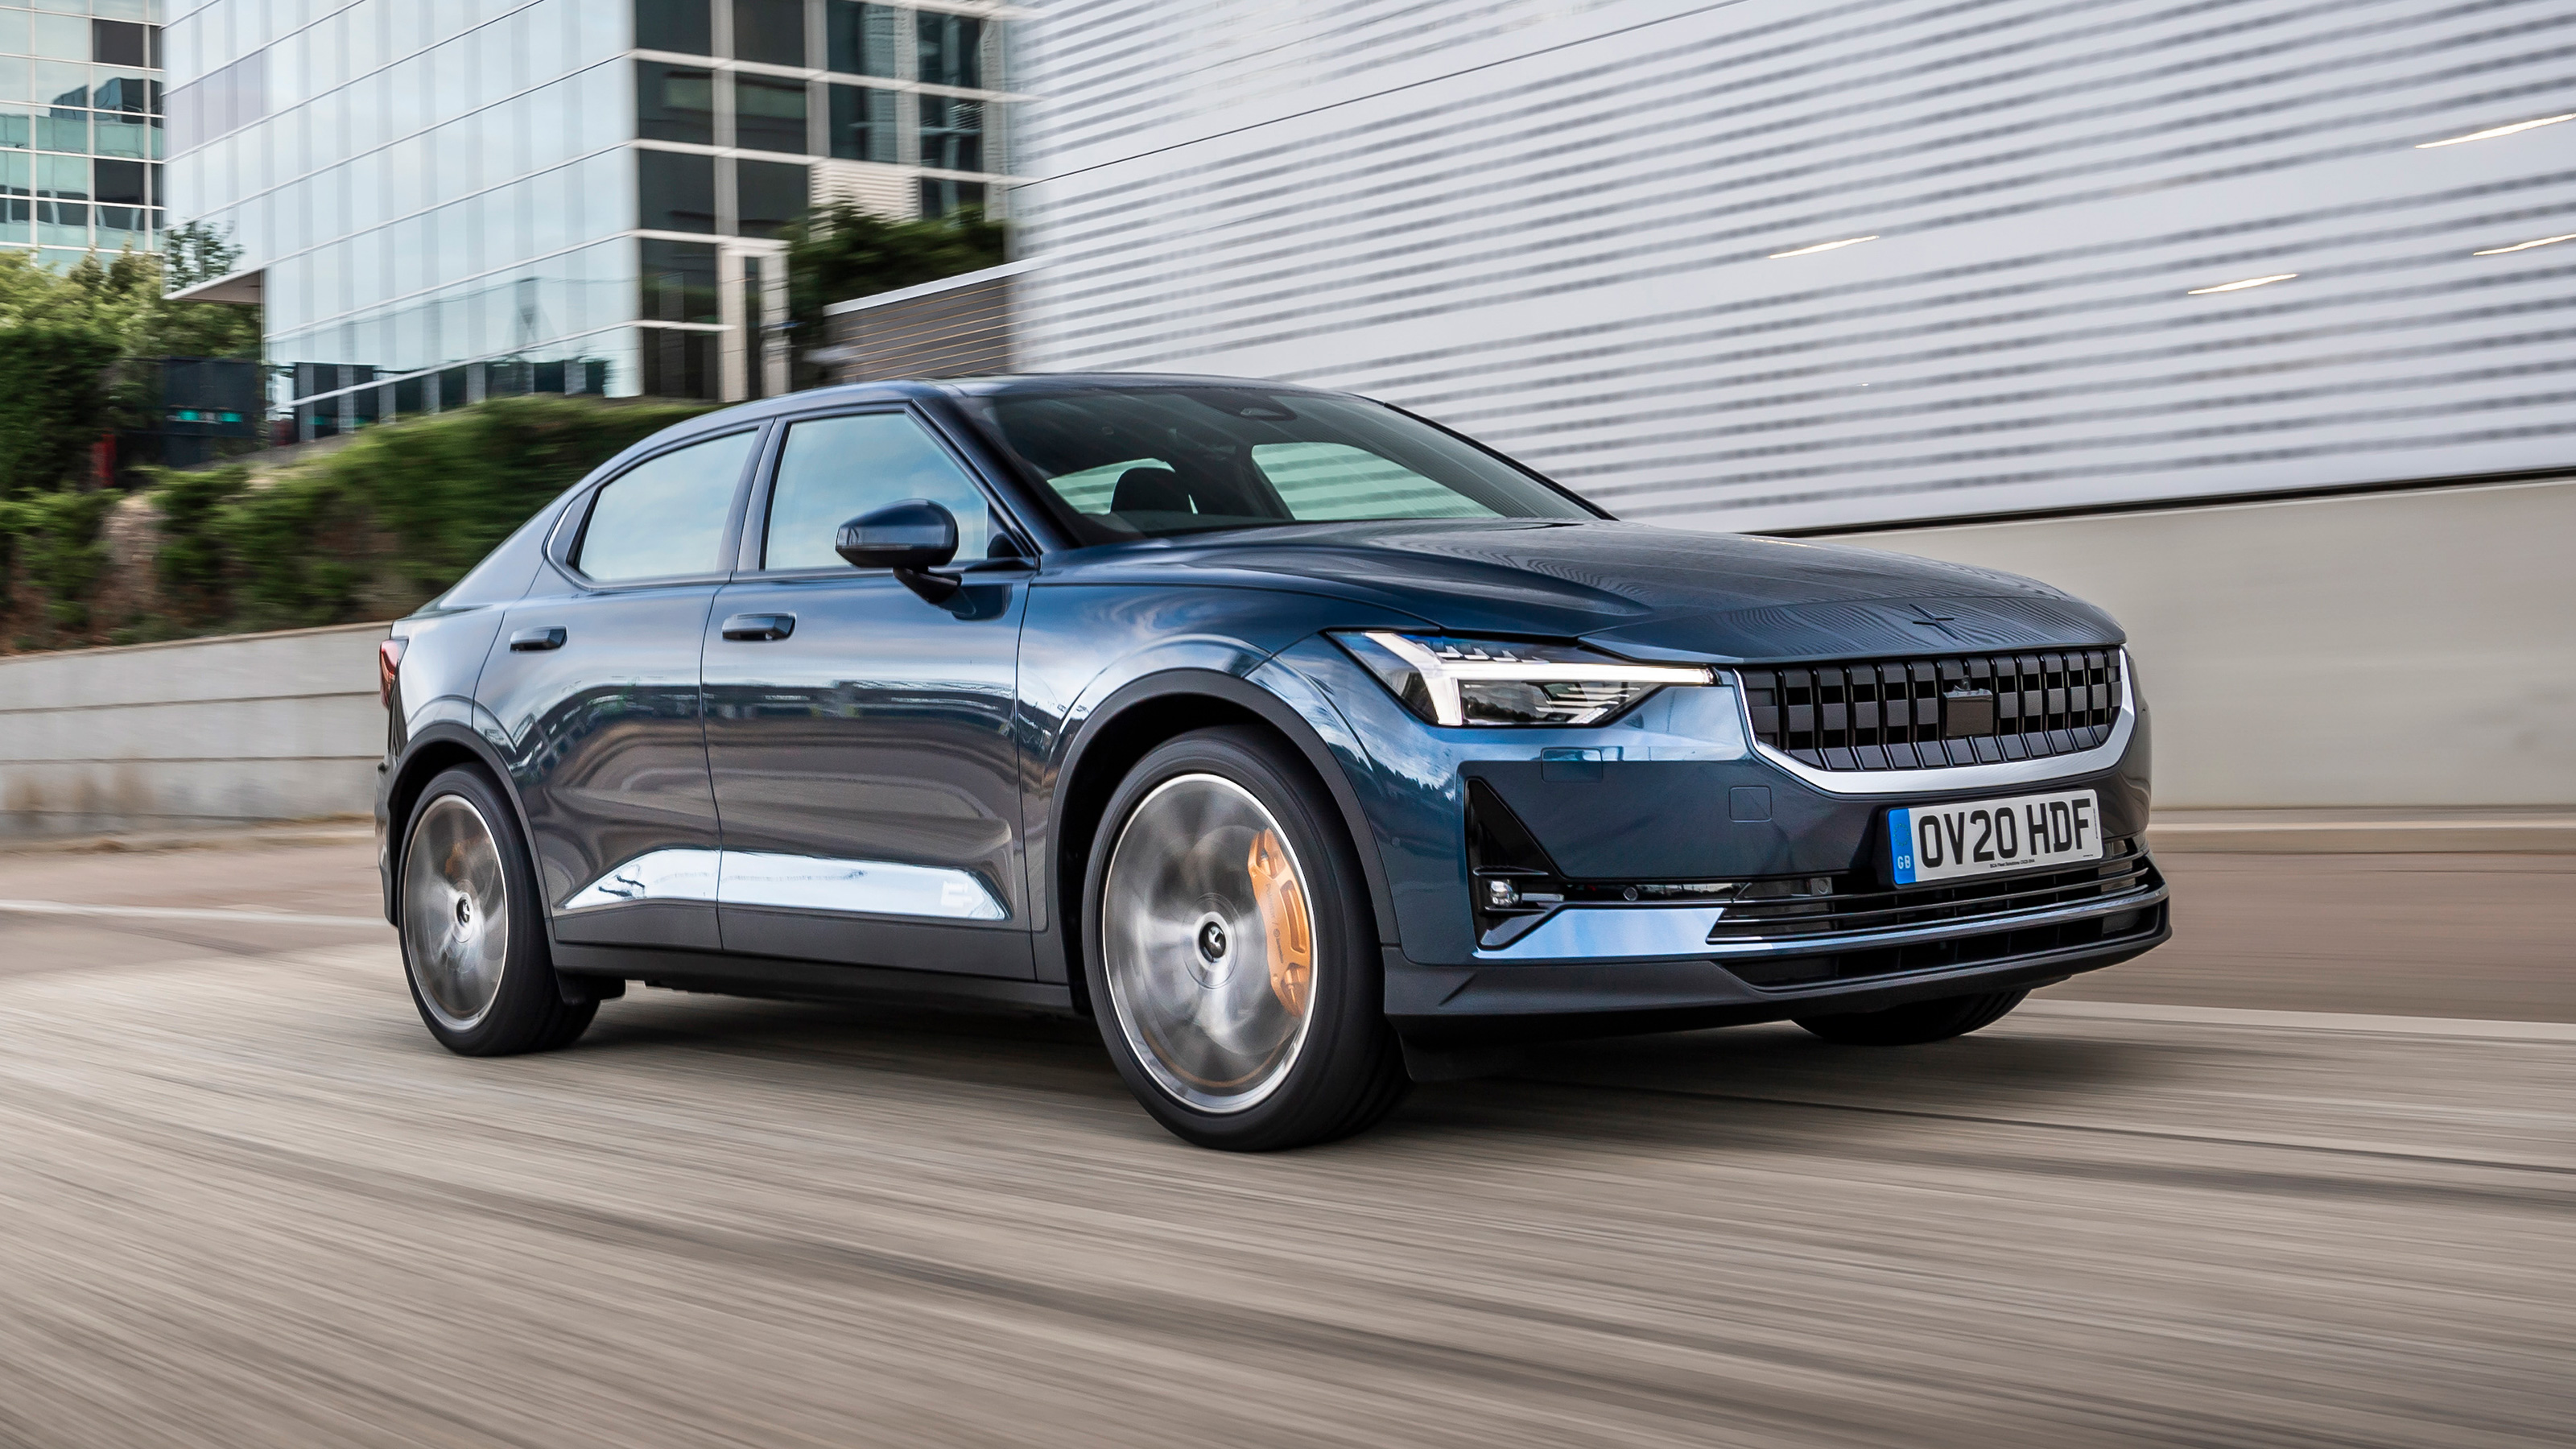 Polestar 2 Polestar 2 Launch Edition Priced From £49,000 In The UK